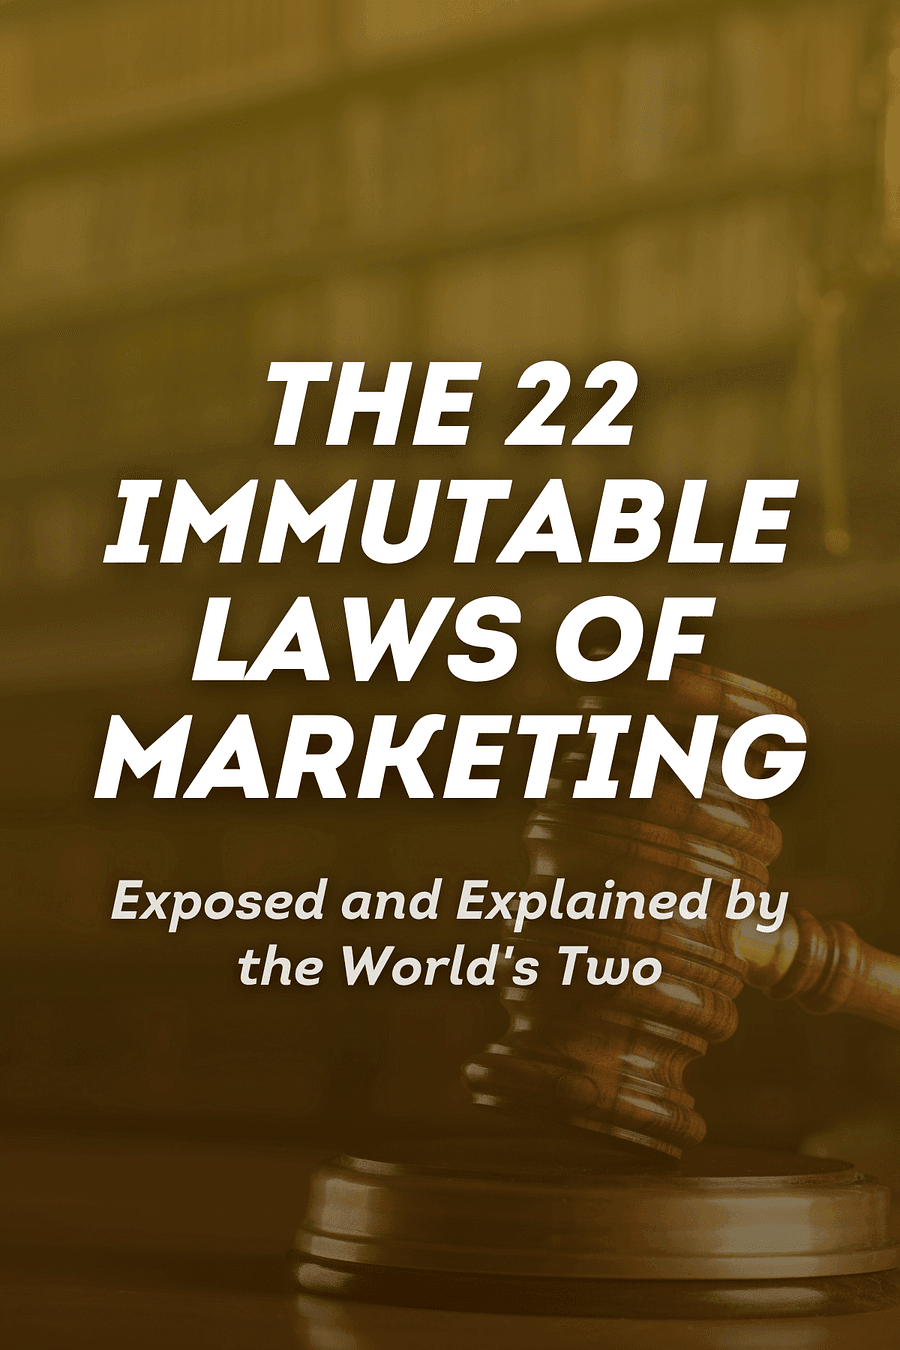 The 22 Immutable Laws of Marketing by Al Ries, Jack Trout - Book Summary